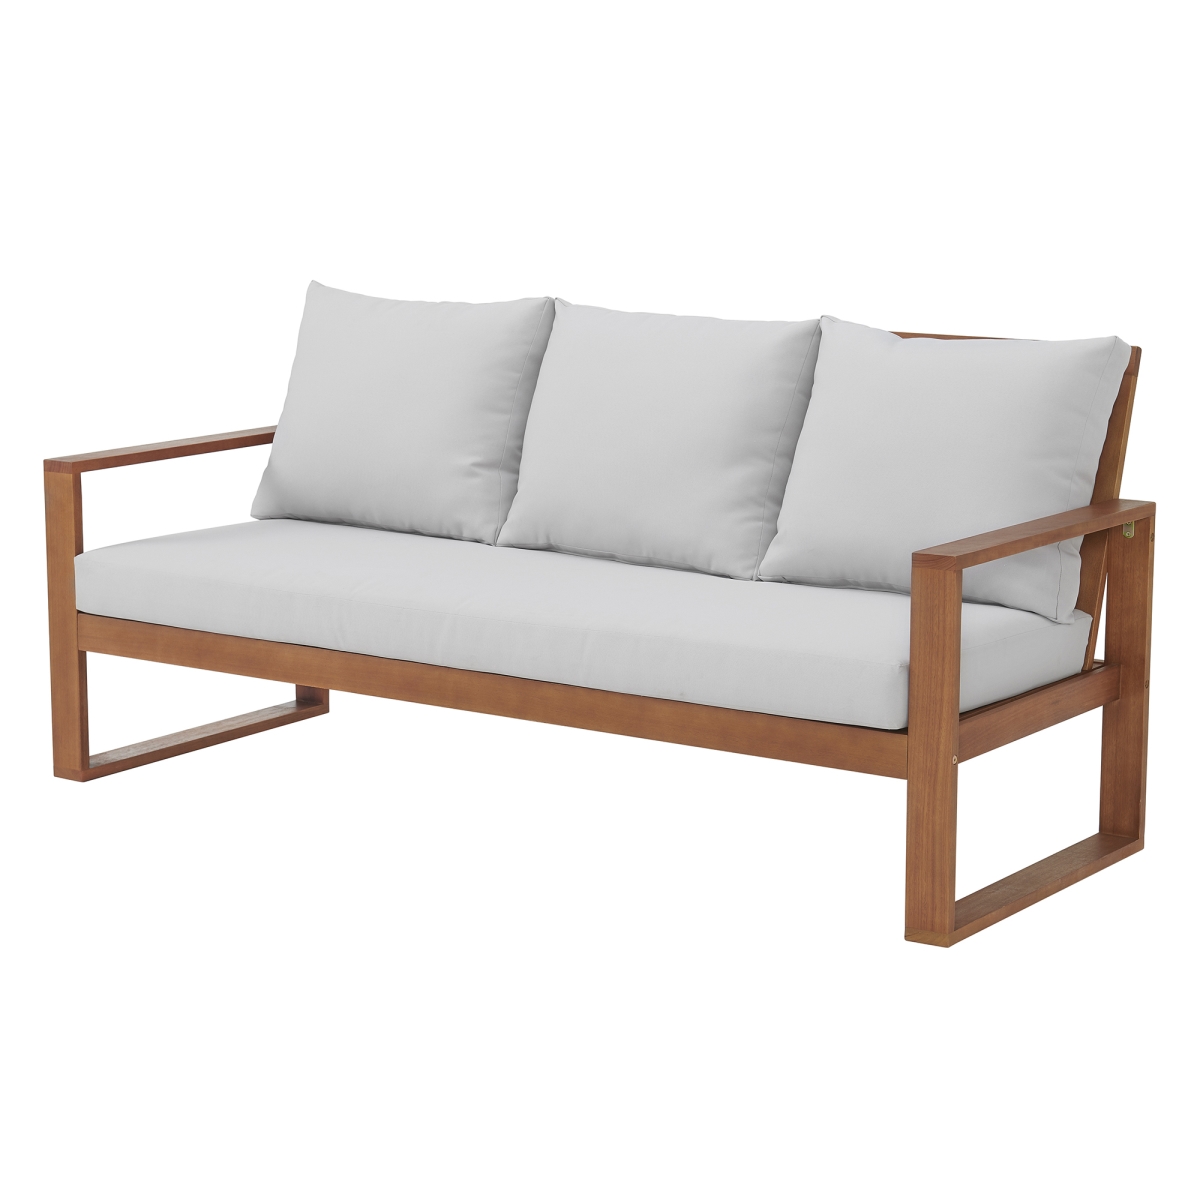 Picture of Alaterre ANGT03EBO Grafton Eucalyptus 3-Seat Outdoor Bench with Gray Cushions